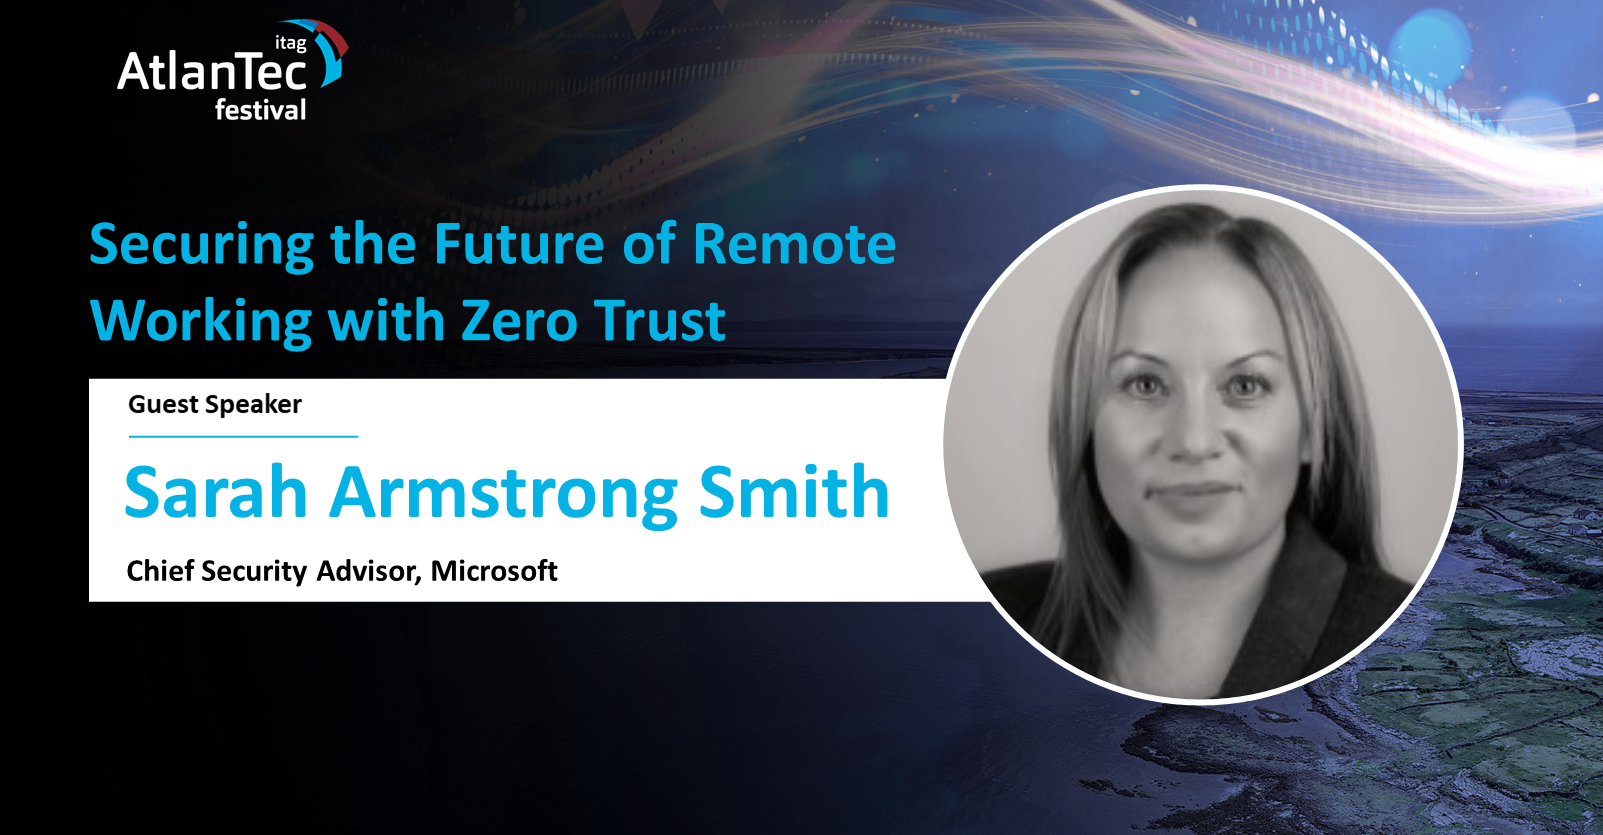 SECURING THE FUTURE OF REMOTE WORKING WITH ZERO TRUST – Sarah Armstrong-Smith